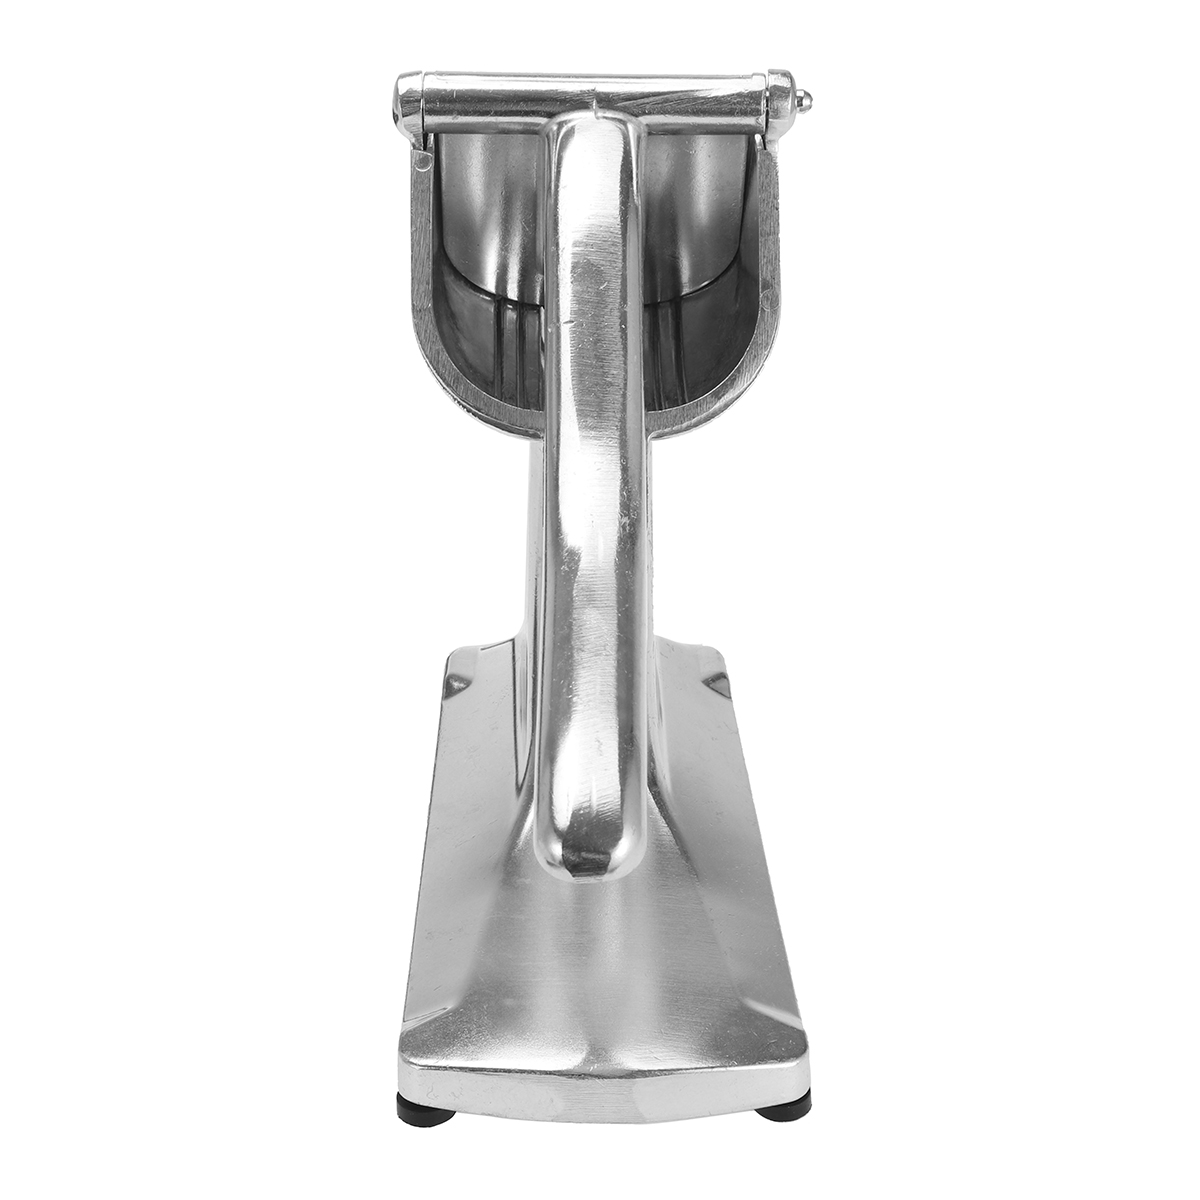 Find Heavy Duty Manual Orange Lemon Lime Citrus Squeezer Fruit Juicer Hand Press Tool for Sale on Gipsybee.com with cryptocurrencies